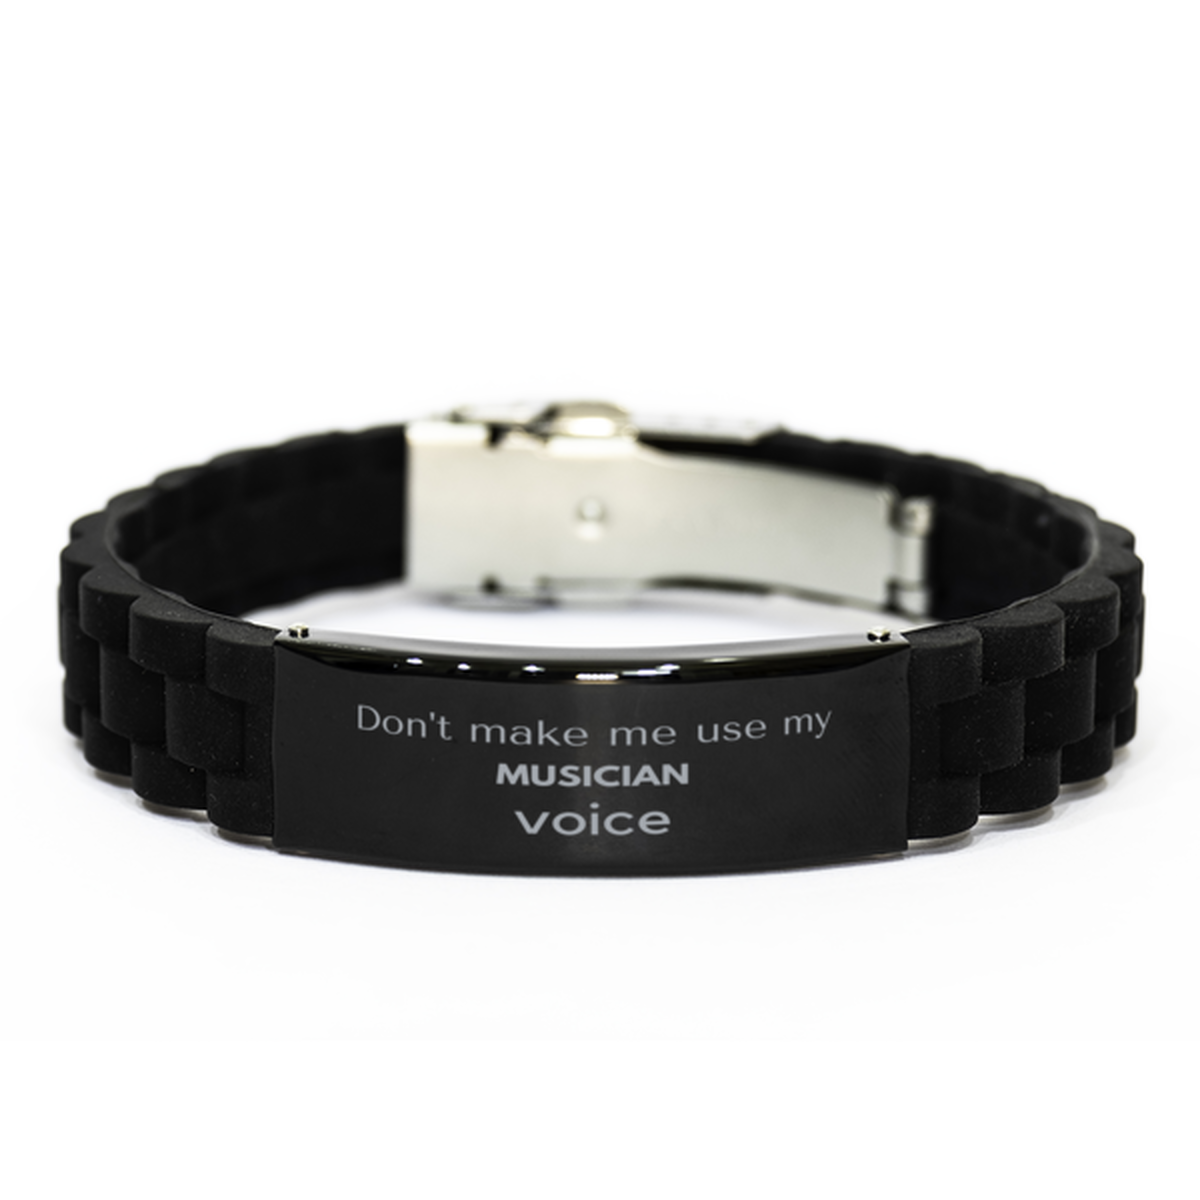 Don't make me use my Musician voice, Sarcasm Musician Gifts, Christmas Musician Black Glidelock Clasp Bracelet Birthday Unique Gifts For Musician Coworkers, Men, Women, Colleague, Friends